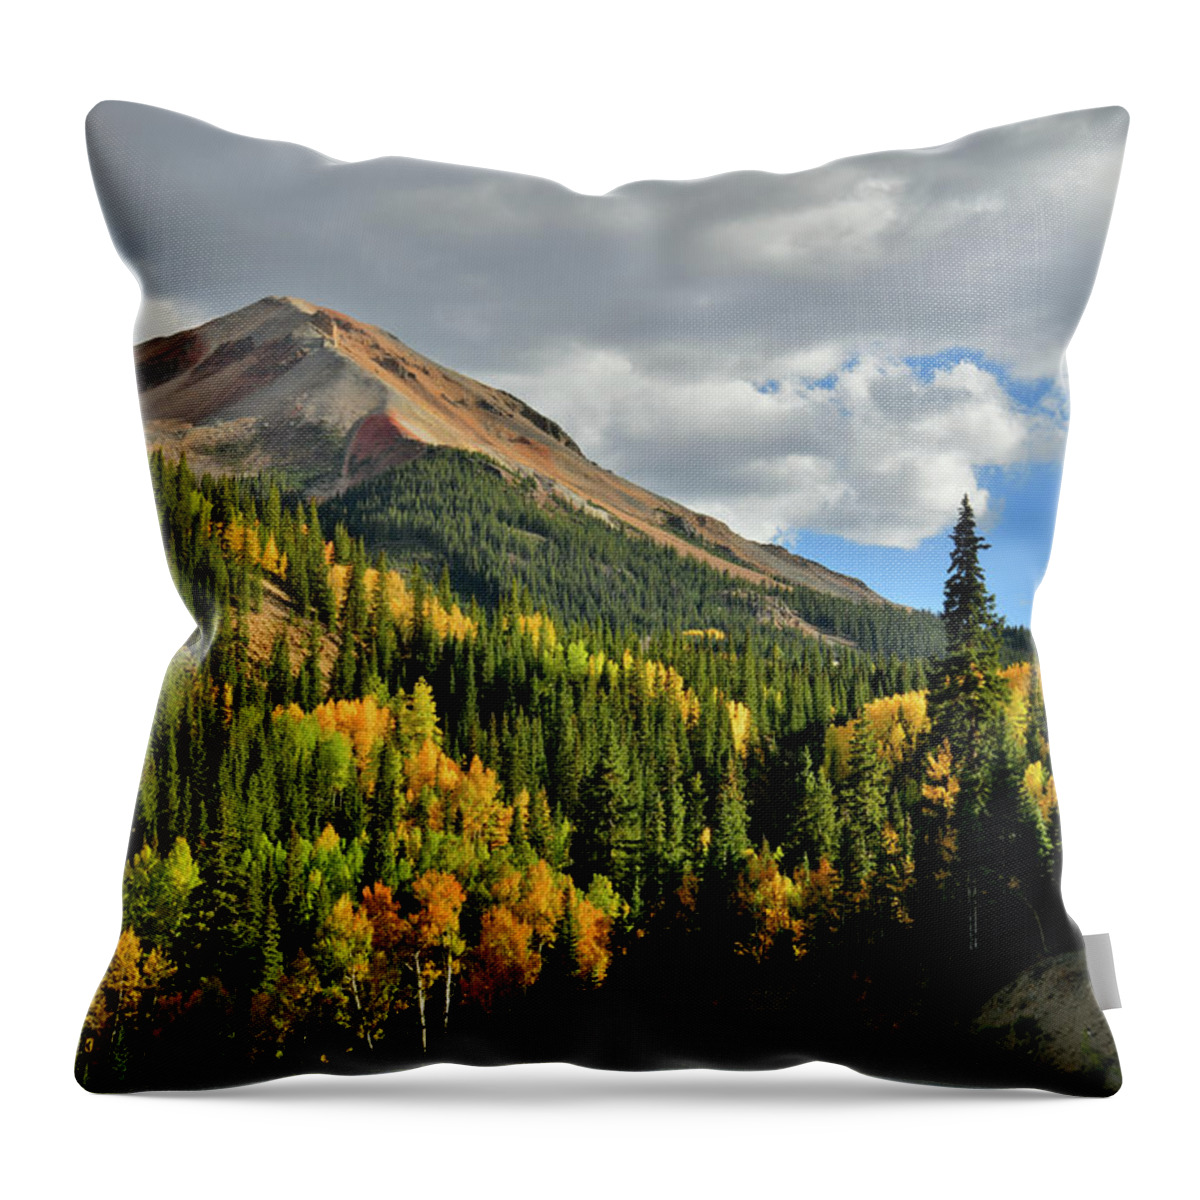 Colorado Throw Pillow featuring the photograph Fall Color Aspens Beneath Red Mountain by Ray Mathis